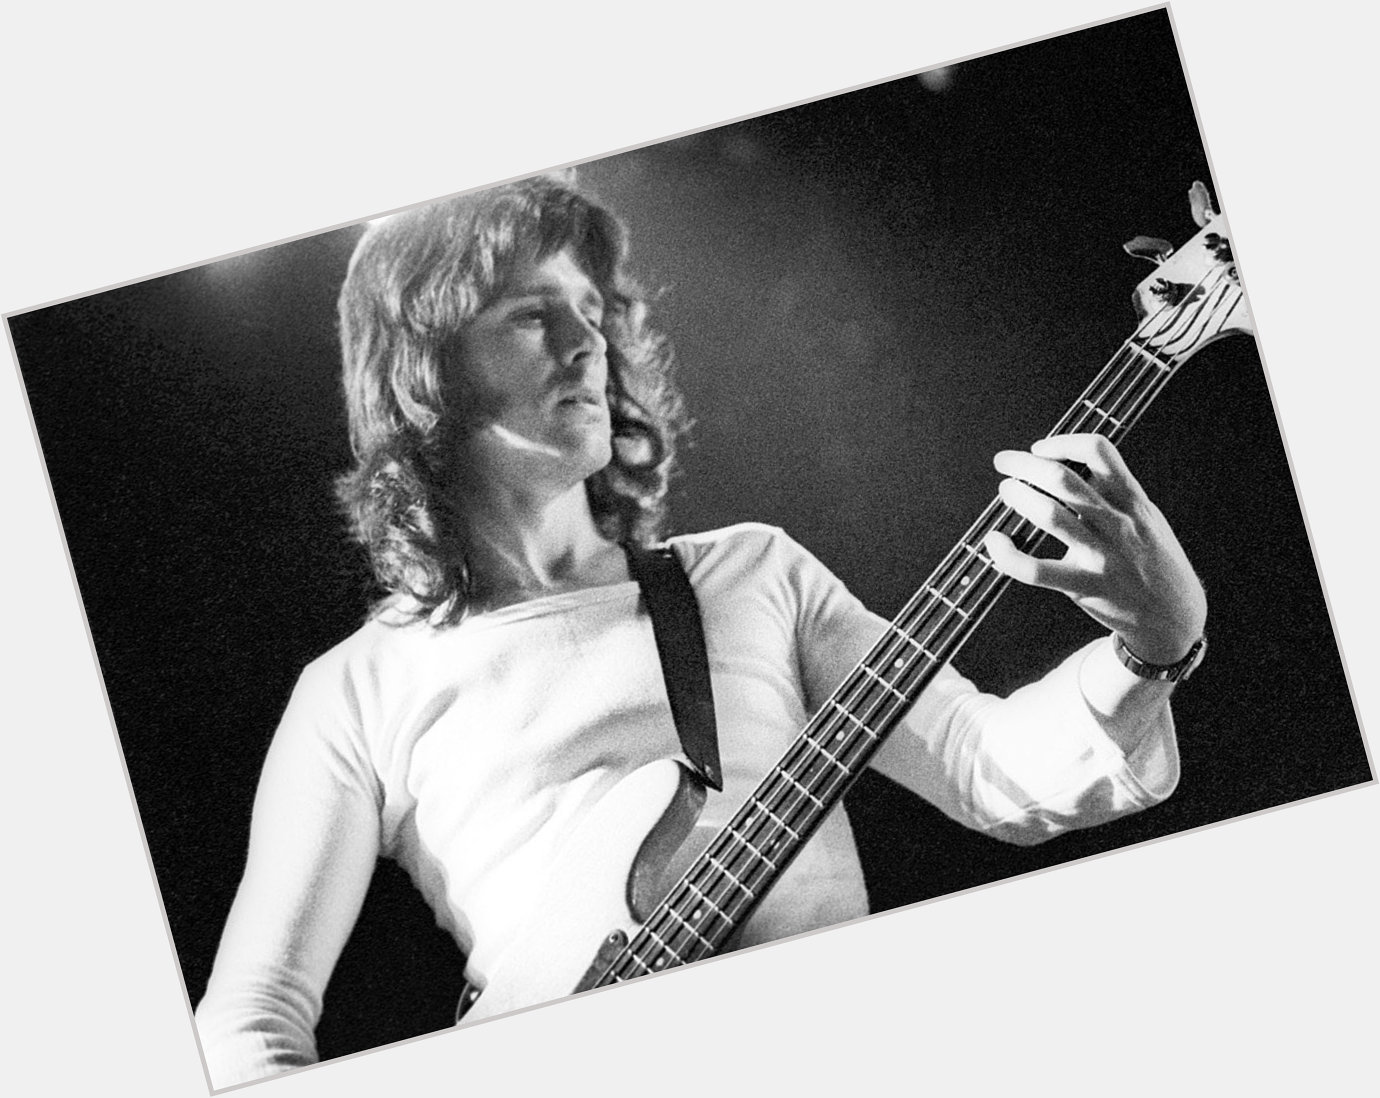 Happy Heavenly Birthday to this amazing voice, songwriter, and bassist John Wetton. You are missed. 